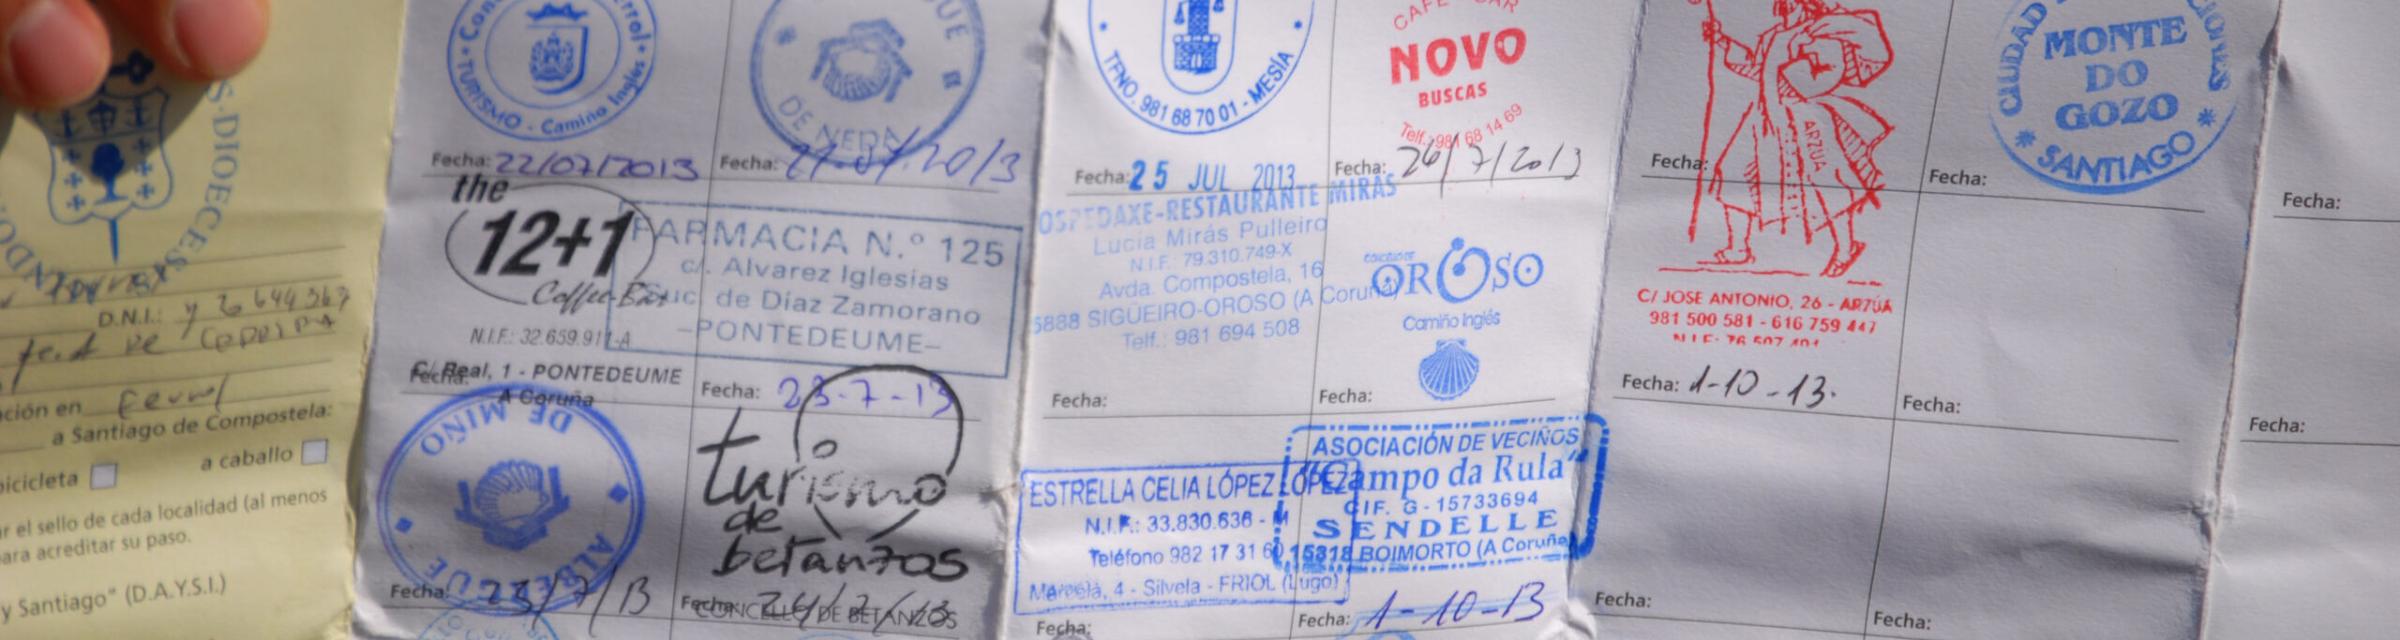 Stamps in your passport show your progress on the Camino de Santiago as you share the Good News with pilgrims.  
Photo by Julia